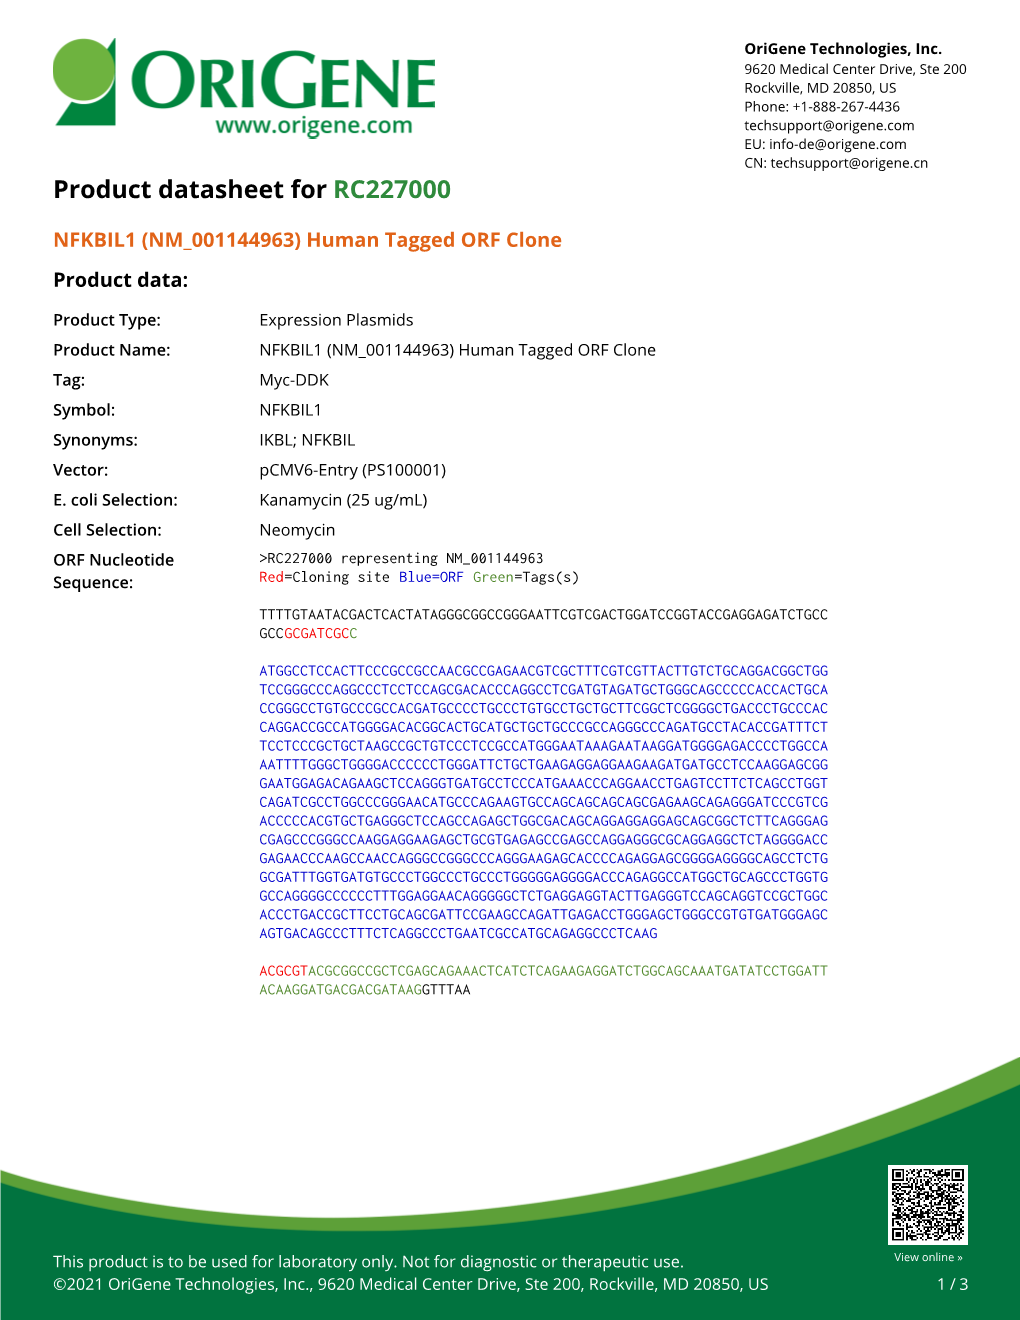 NFKBIL1 (NM 001144963) Human Tagged ORF Clone Product Data